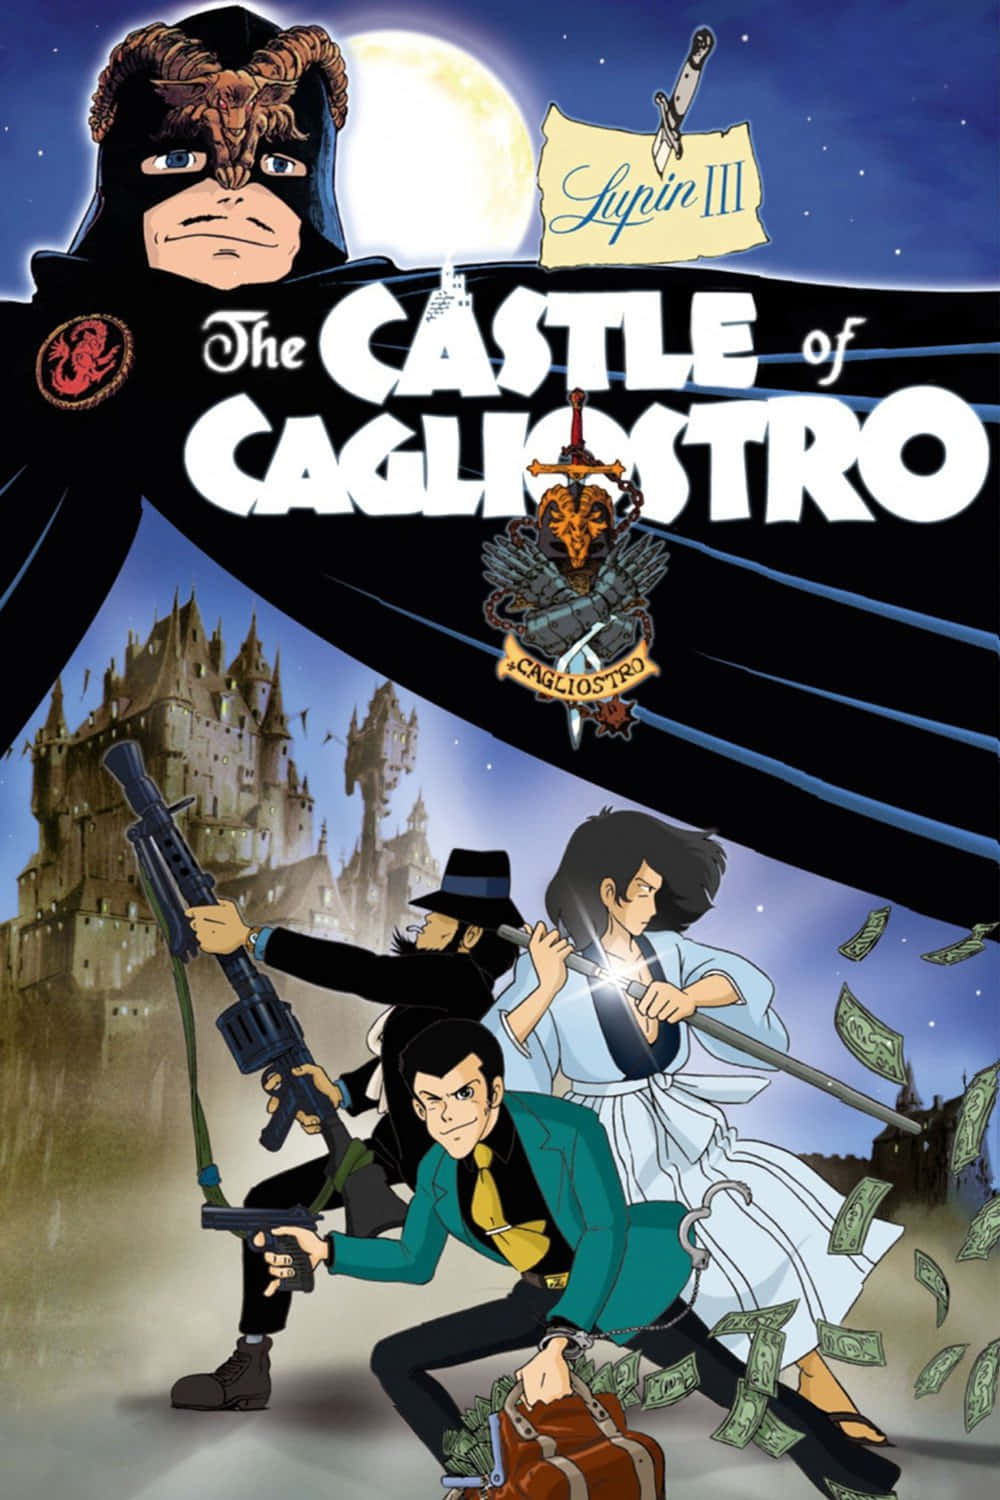 Lupin III and Clarisse in a scene from The Castle of Cagliostro Wallpaper